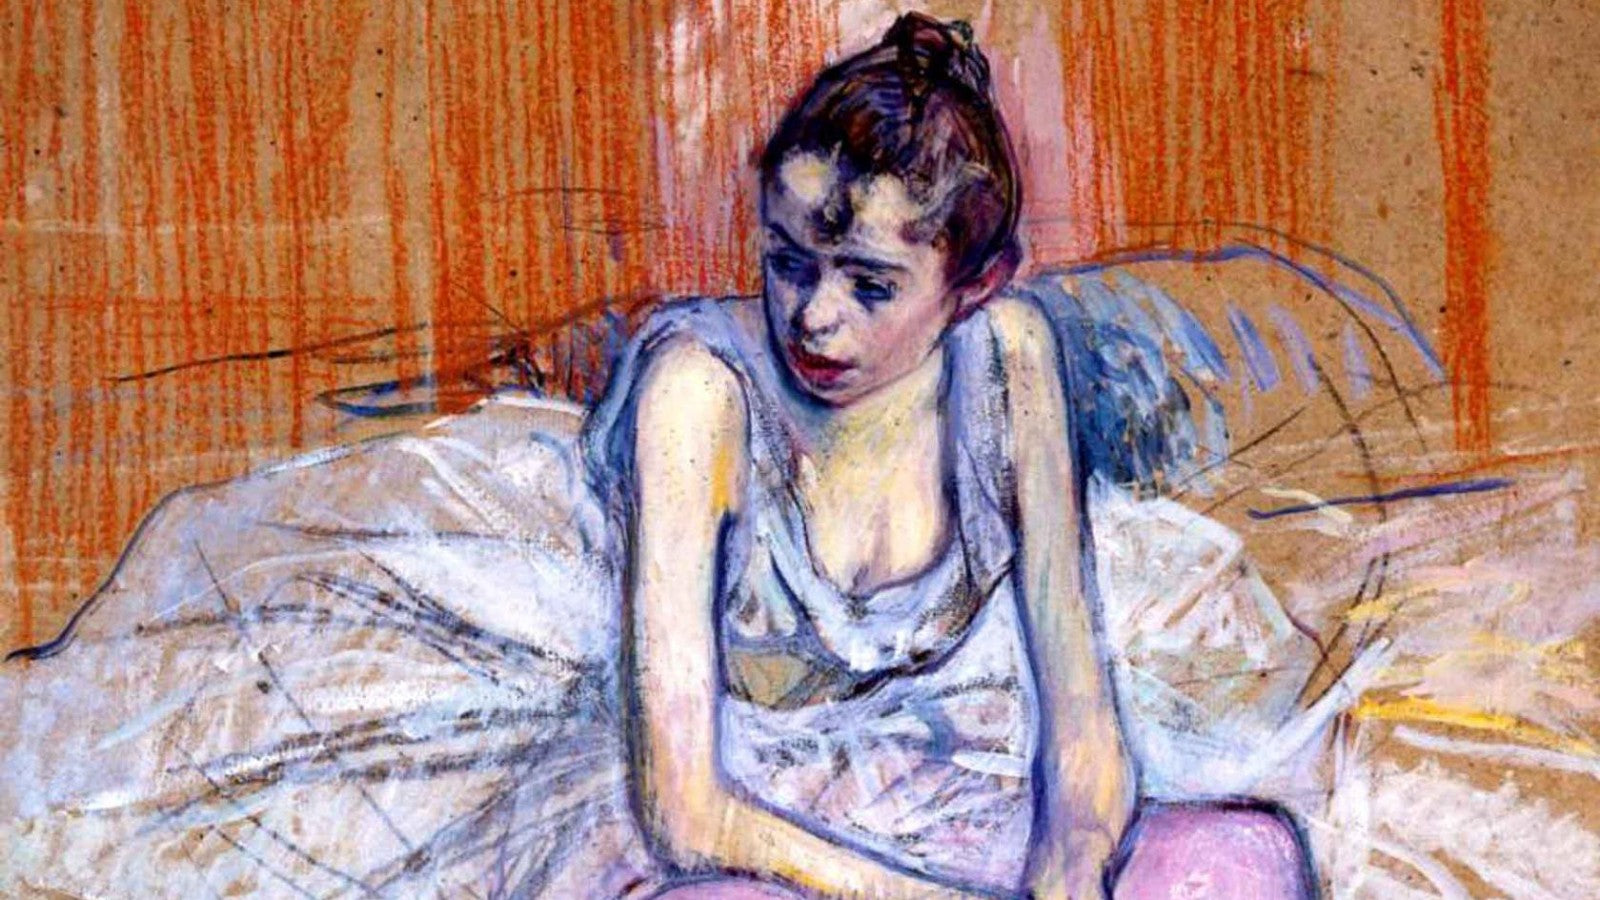 Seated Dancer in Pink Tights painting by Henri de Toulouse-Lautrec (1890)